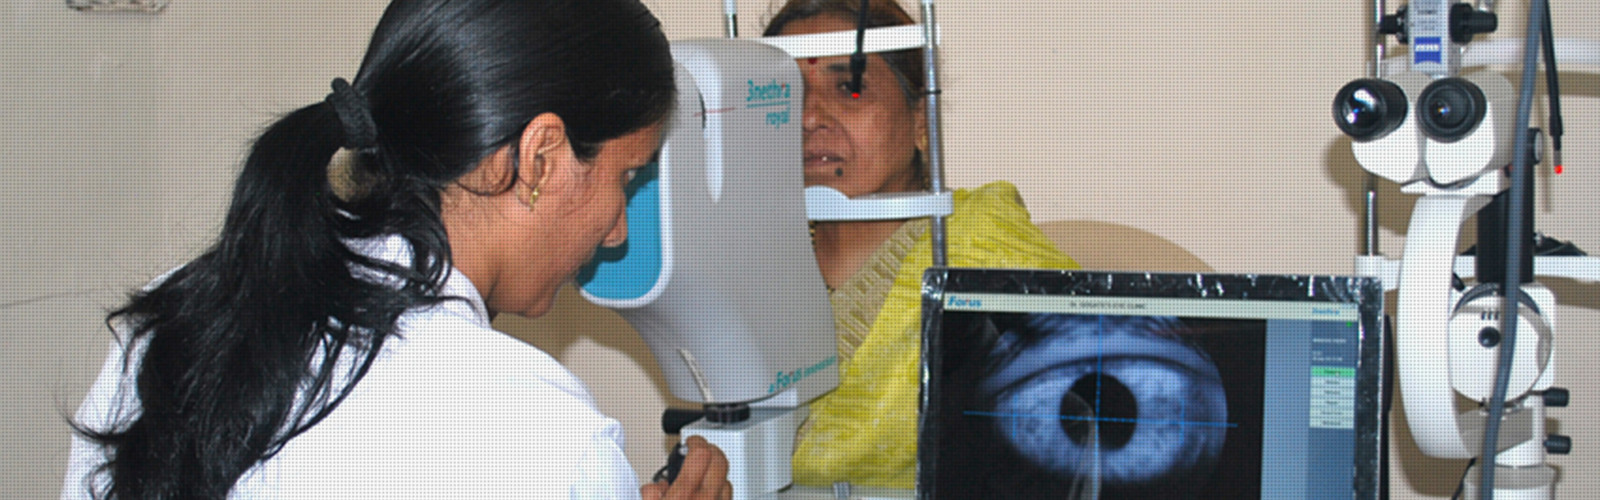 Doctor is checking the eye sight for patient